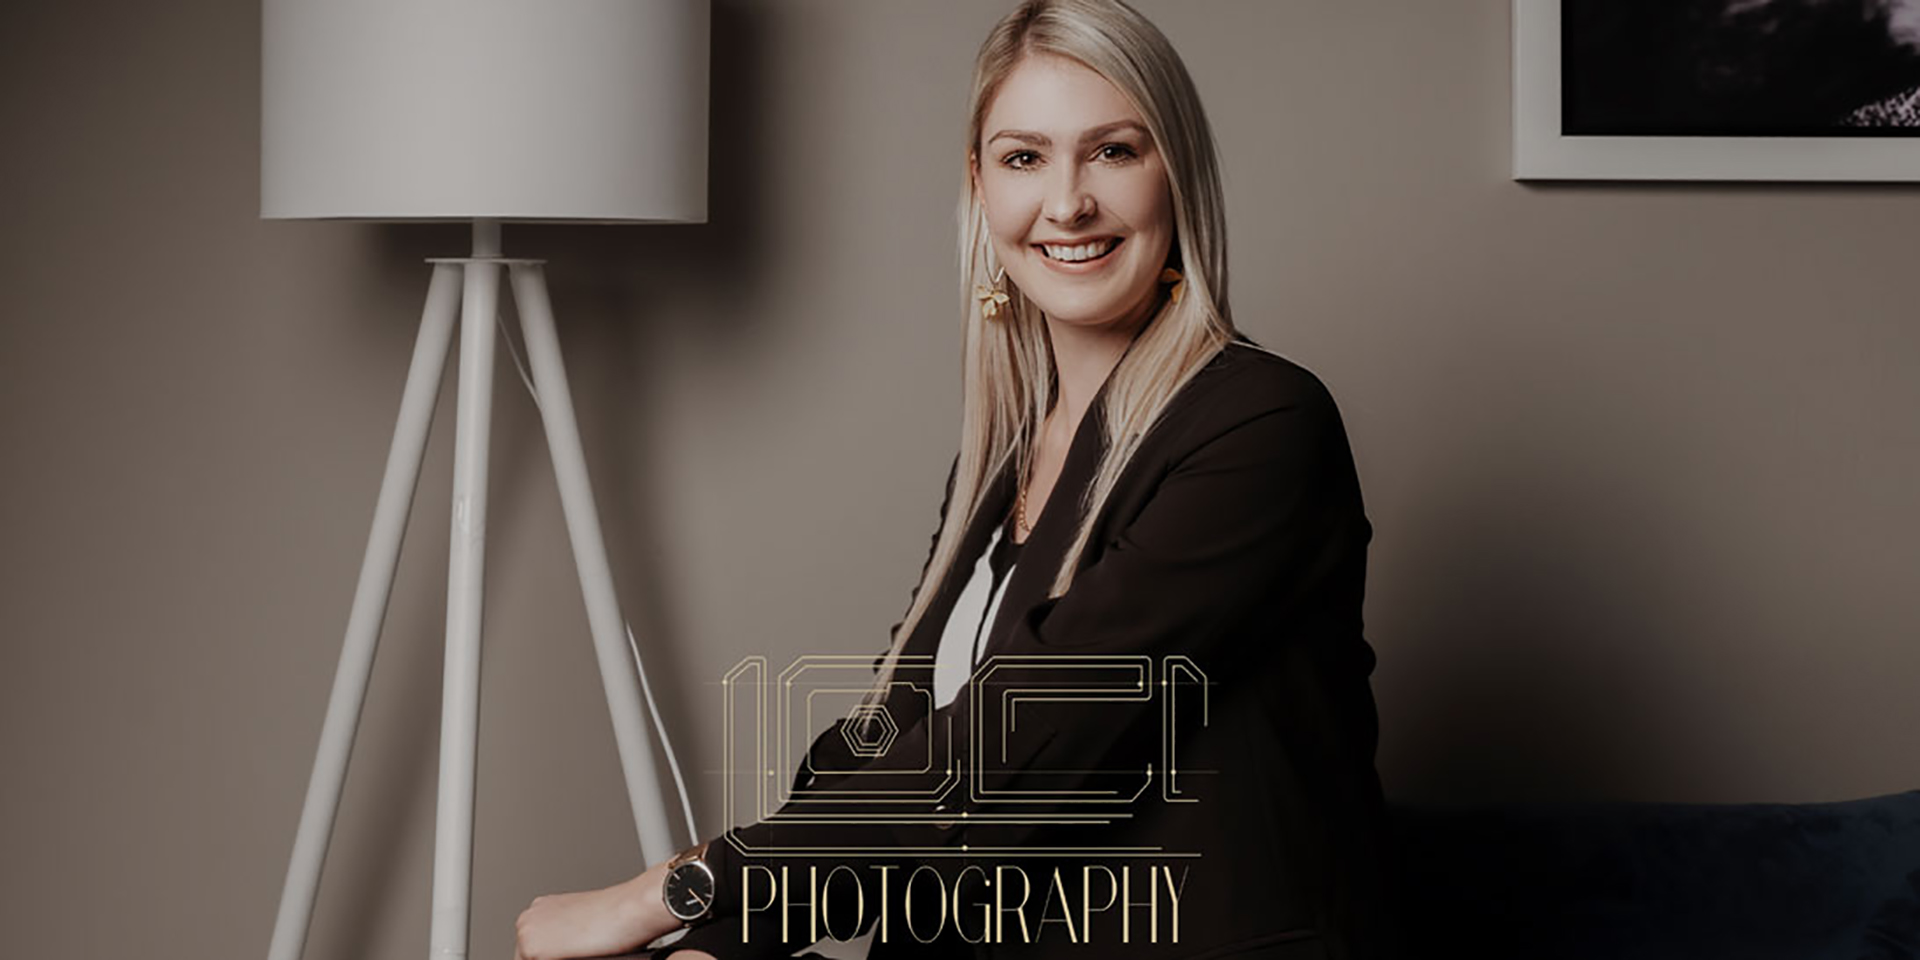 Blog header image for corporate photography blog on the Loci Photography website